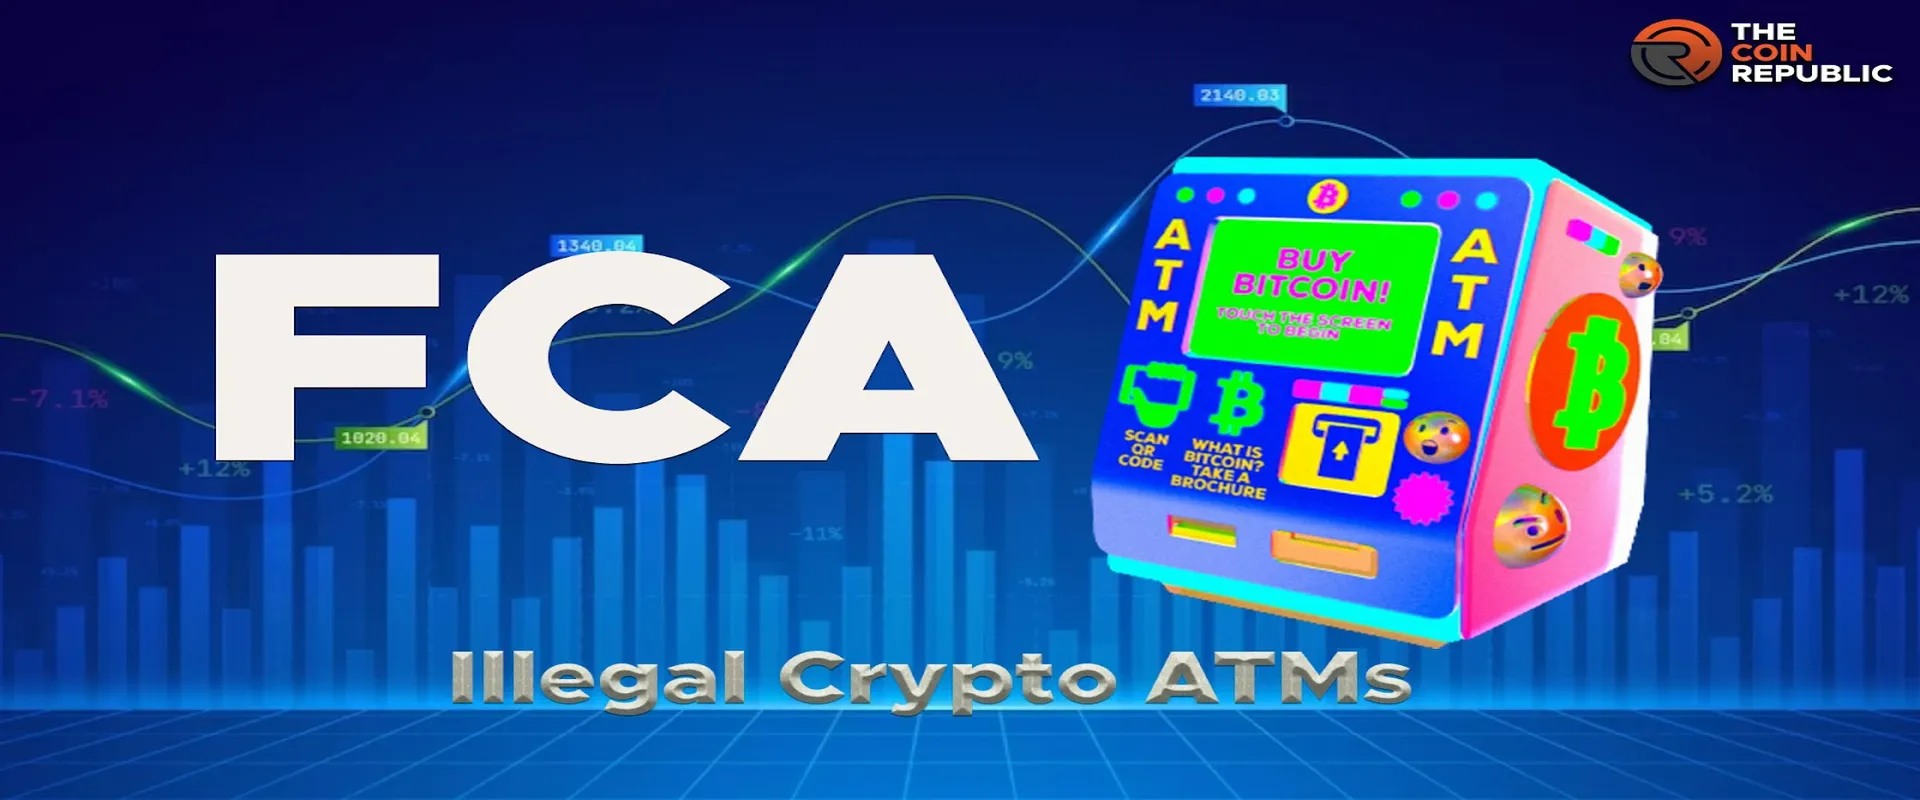 U.K.’s FCA Probes Illegal Crypto ATMs Operating in the Country